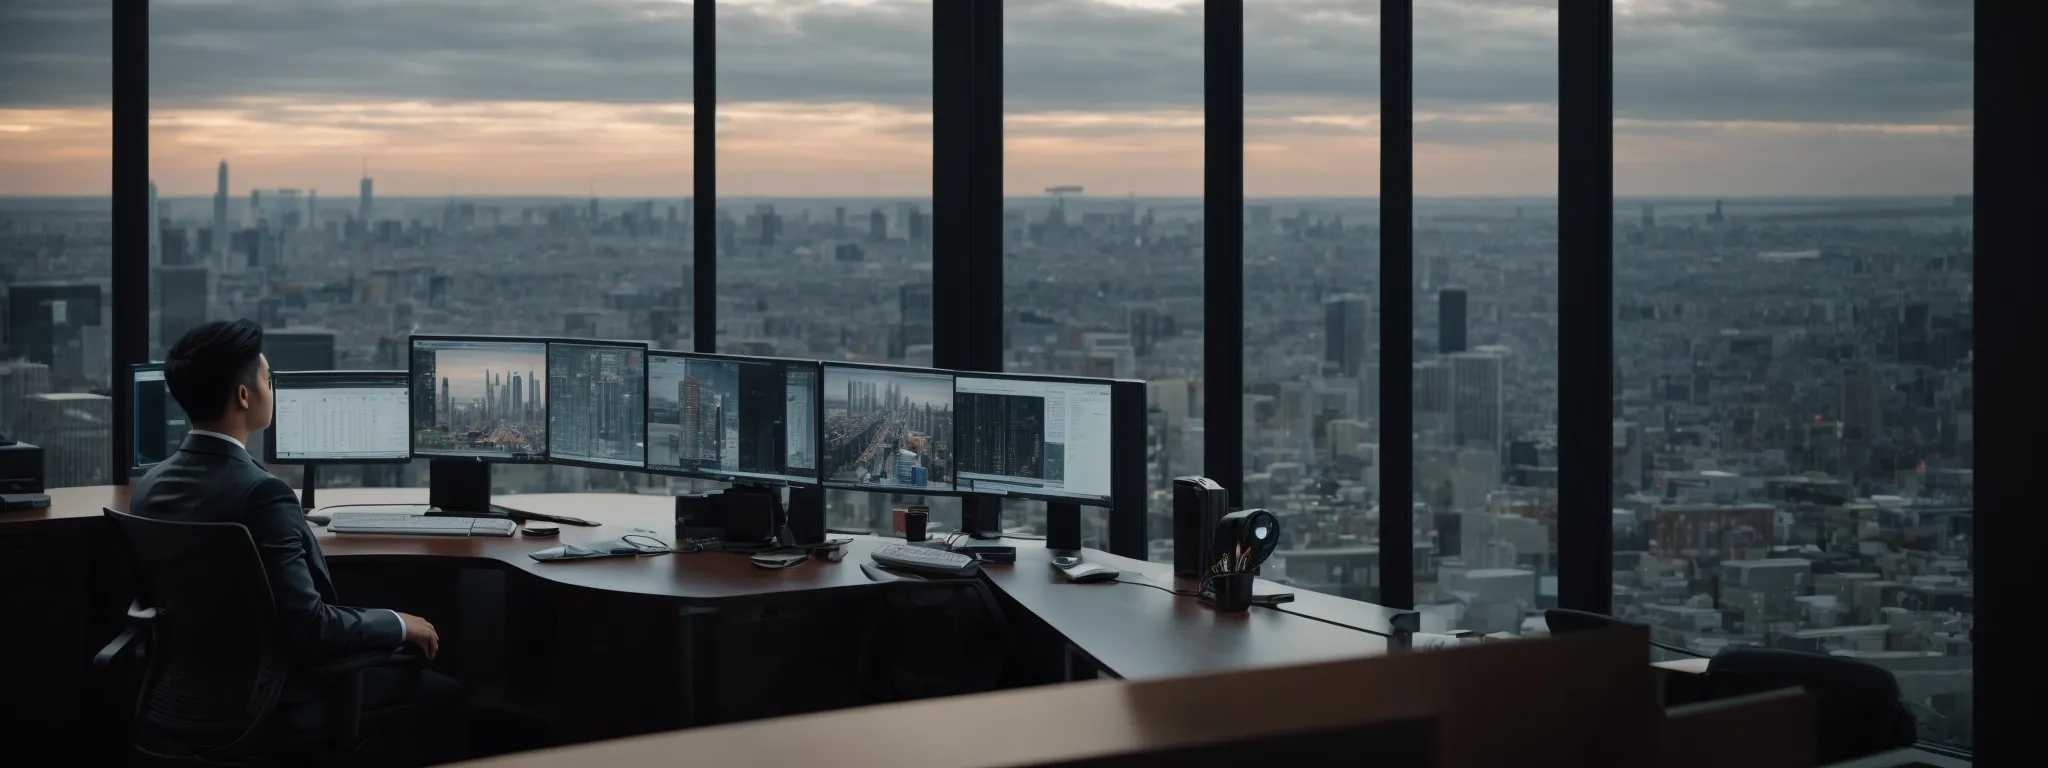 a person sits at a modern desk, intently analyzing data on a computer screen in a sleek, professional office space with a cityscape view.